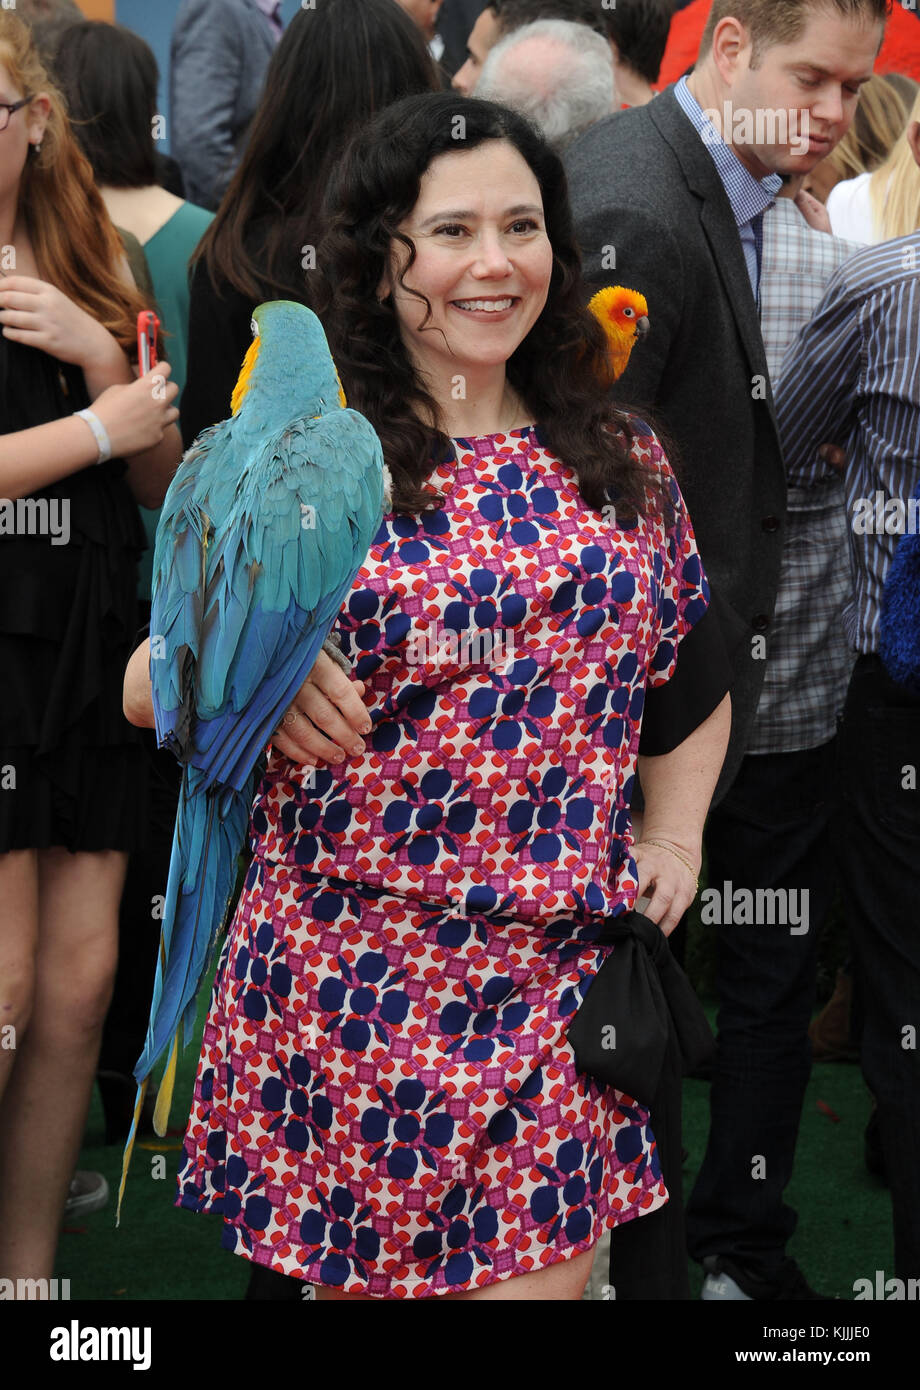 WESTWOOD, CA - MAY 07: Alex Borstein arrives at the Premiere Of Sony Pictures' 'The Angry Birds Movie' at Regency Village Theatre on May 7, 2016 in Westwood, California.   People:  Alex Borstein Stock Photo